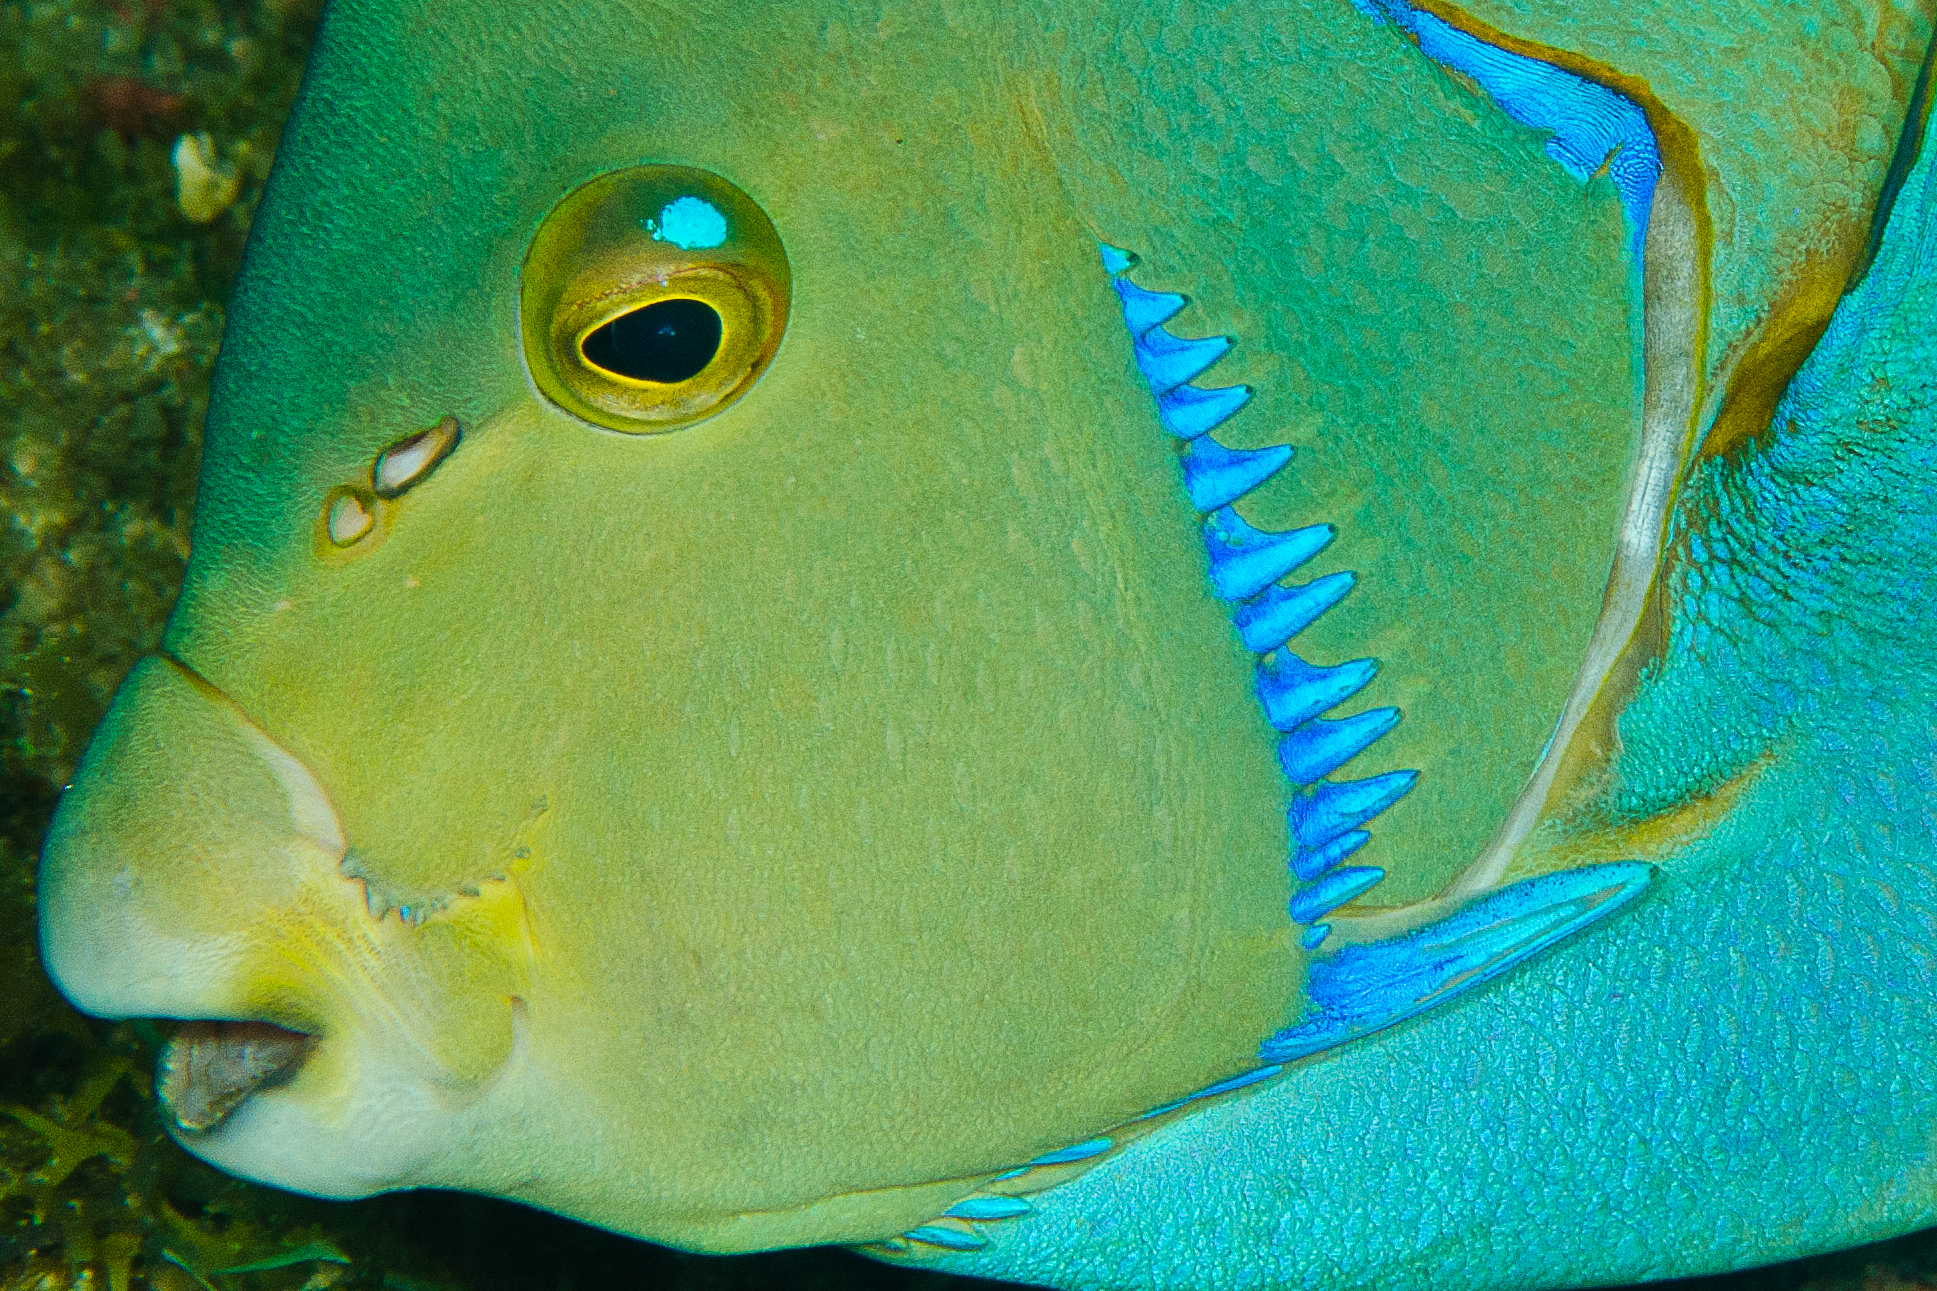 The blue angelfish has spines on its gill plate.